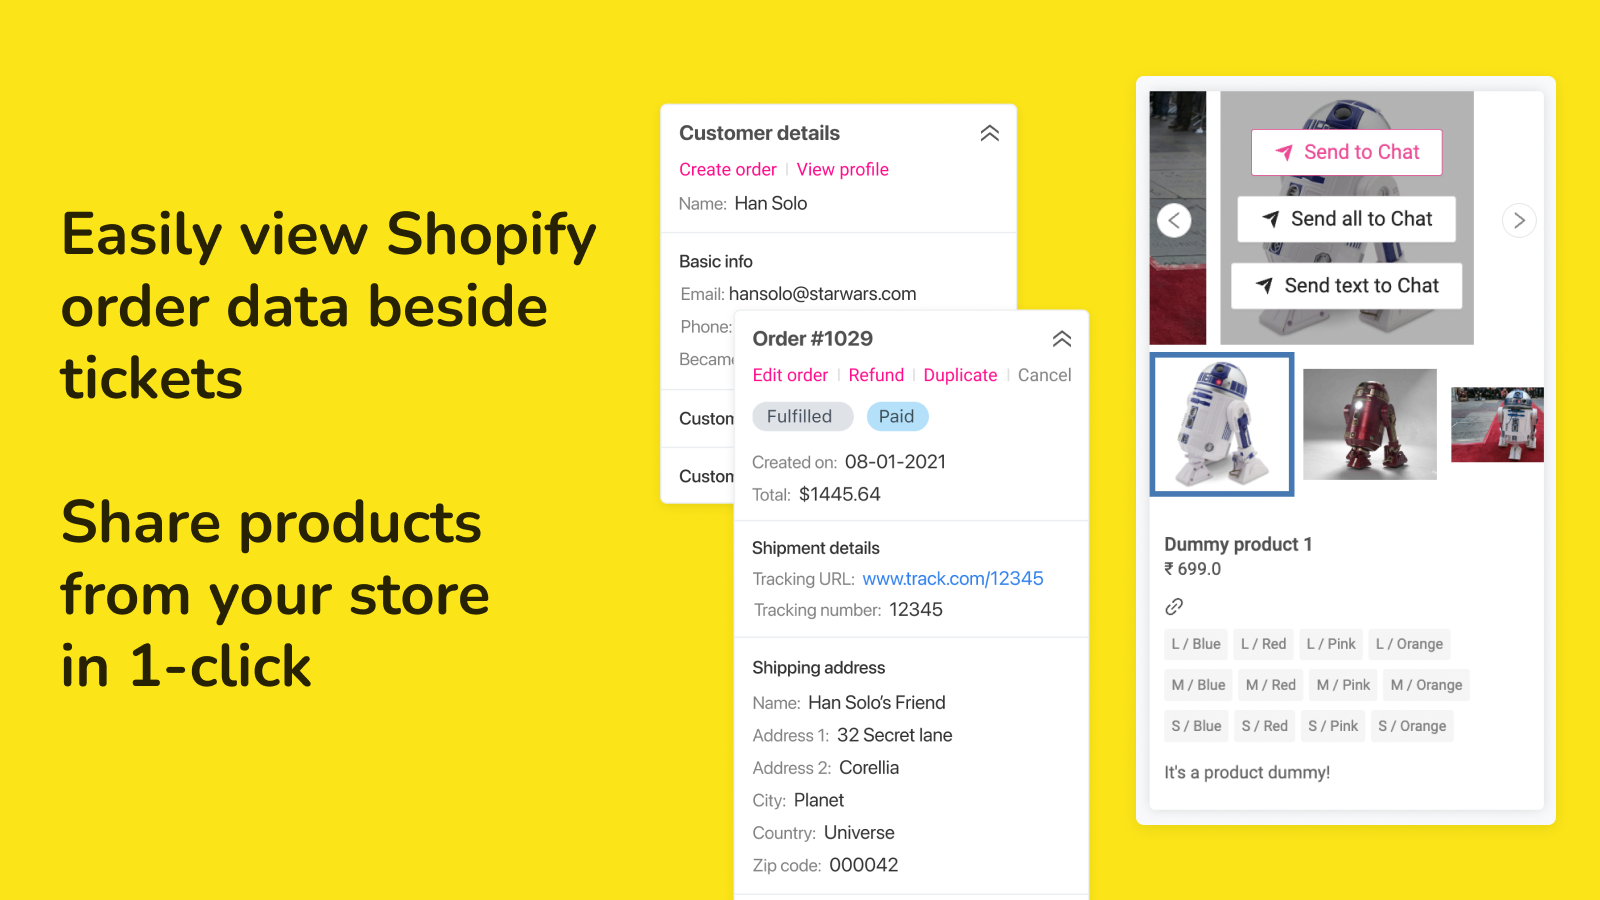 Access Shopify data beside ticket